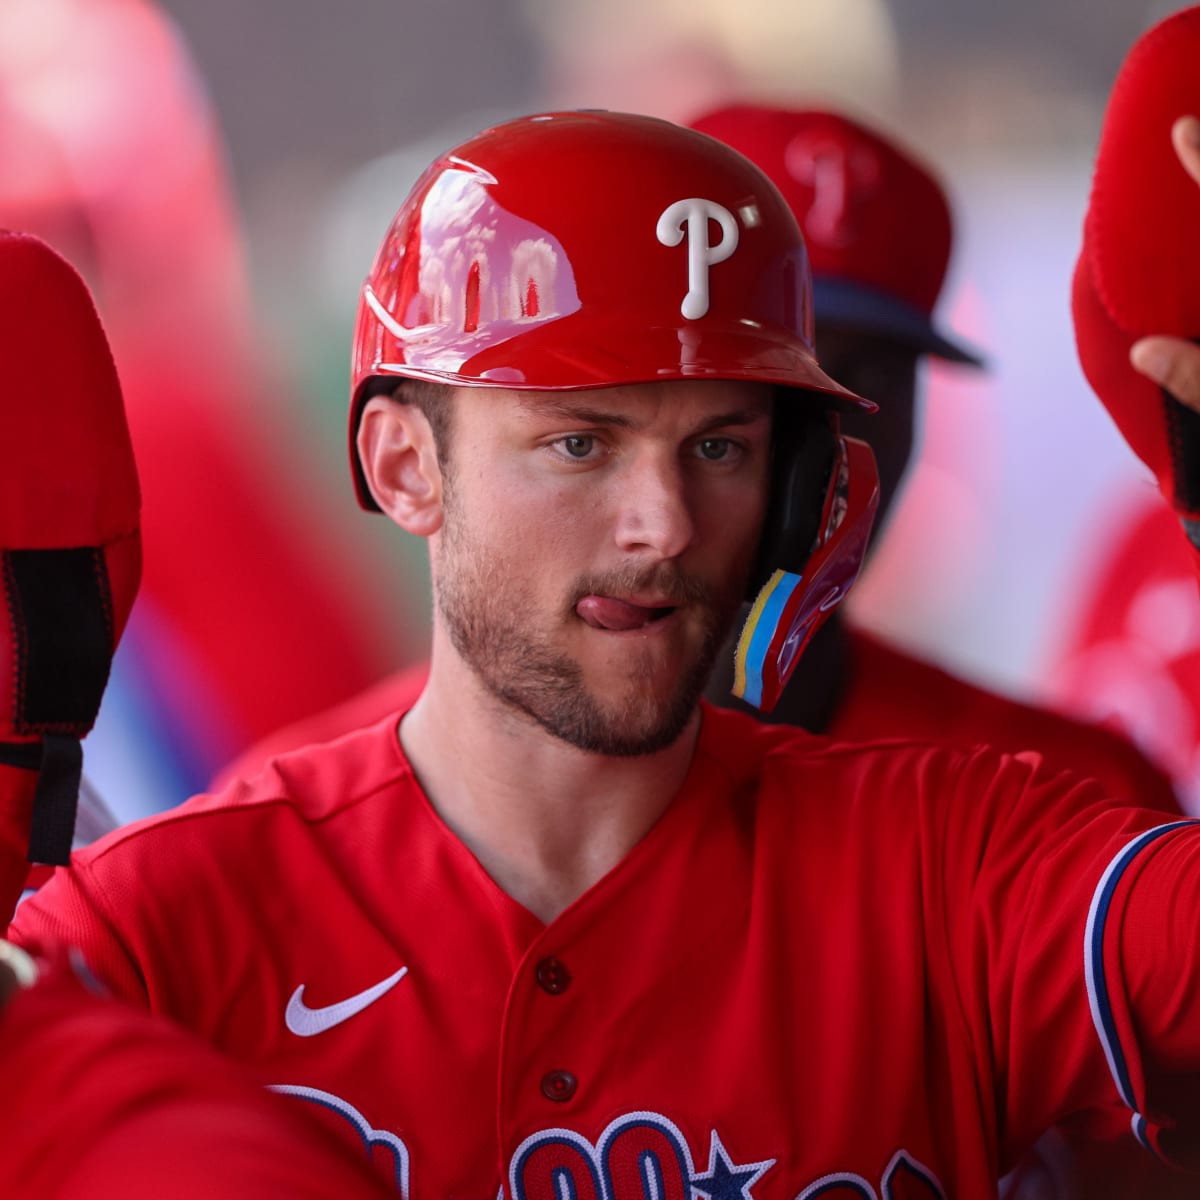 Trea Turner makes his Phillies debut in the leadoff spot to great success